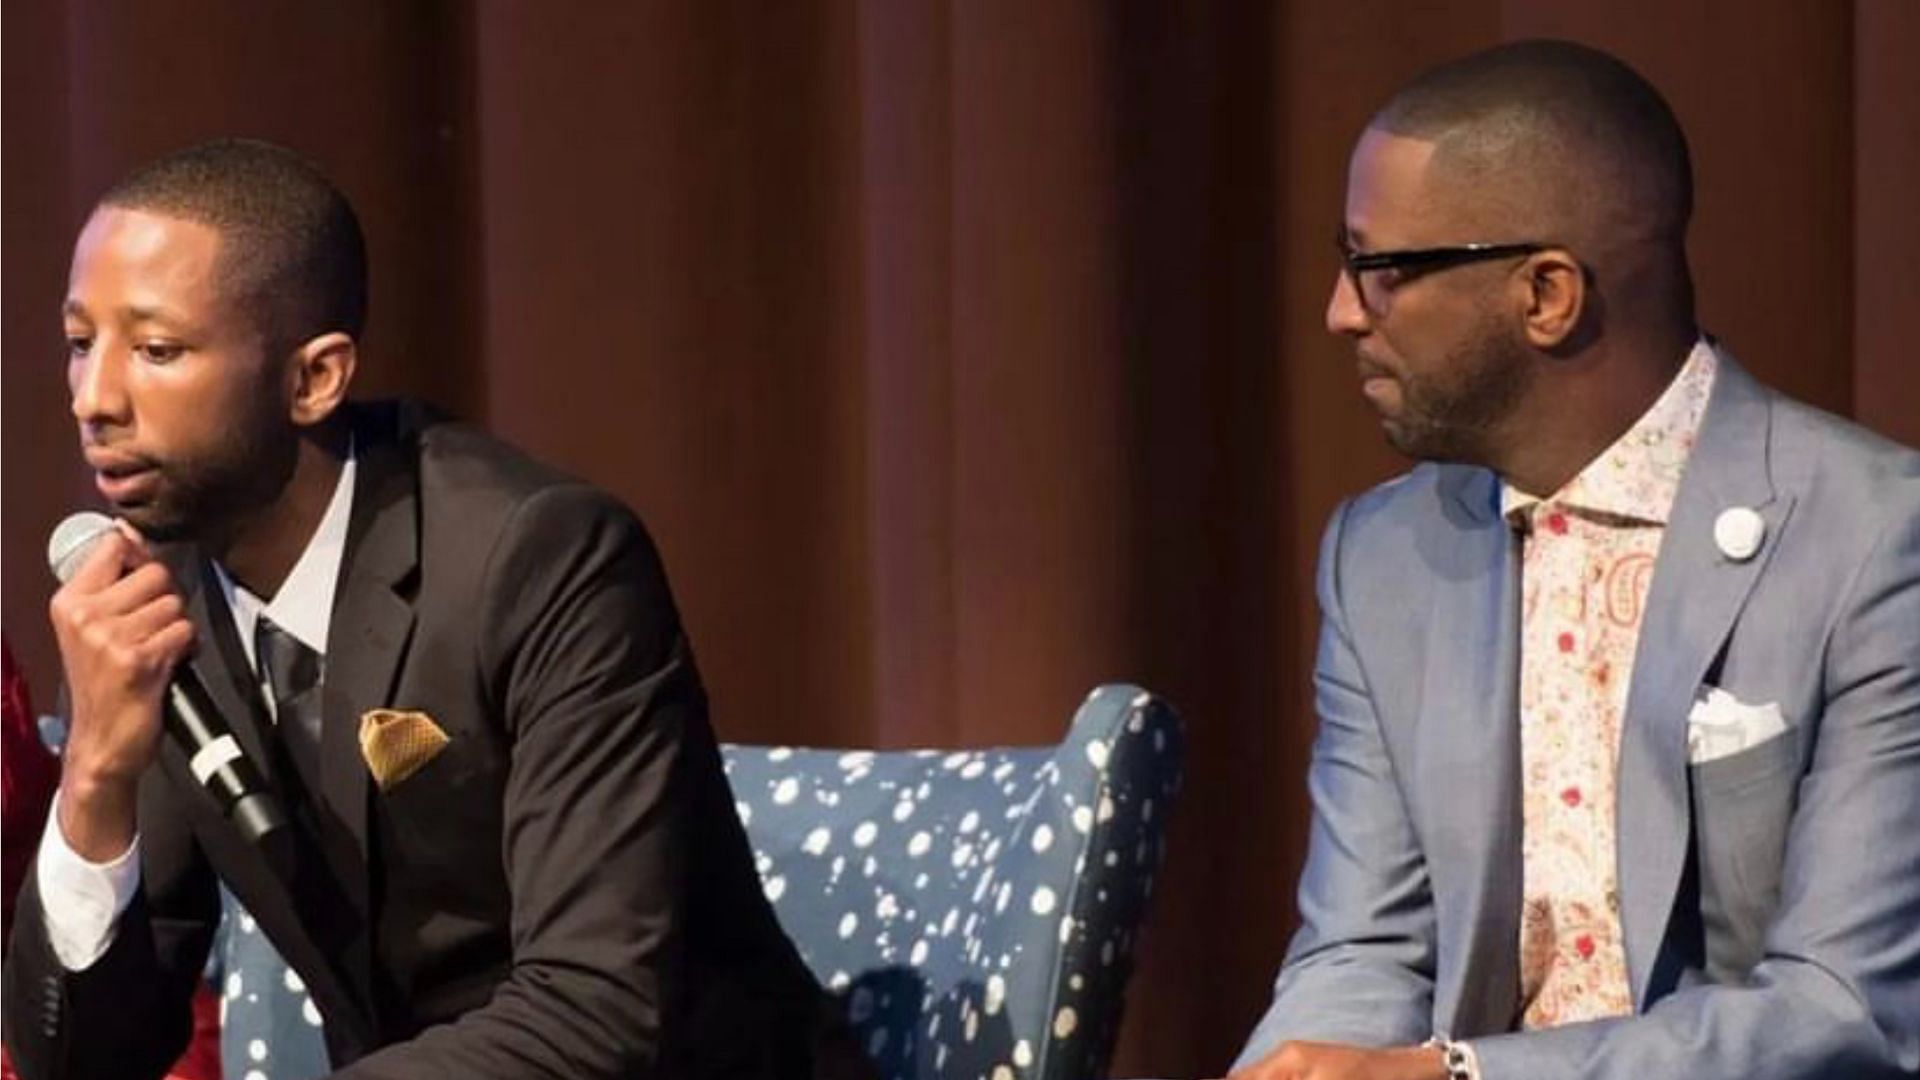 Brandon Smiley with father, Rickey Smiley on a show. (Photo via Instagram/globalgrind)